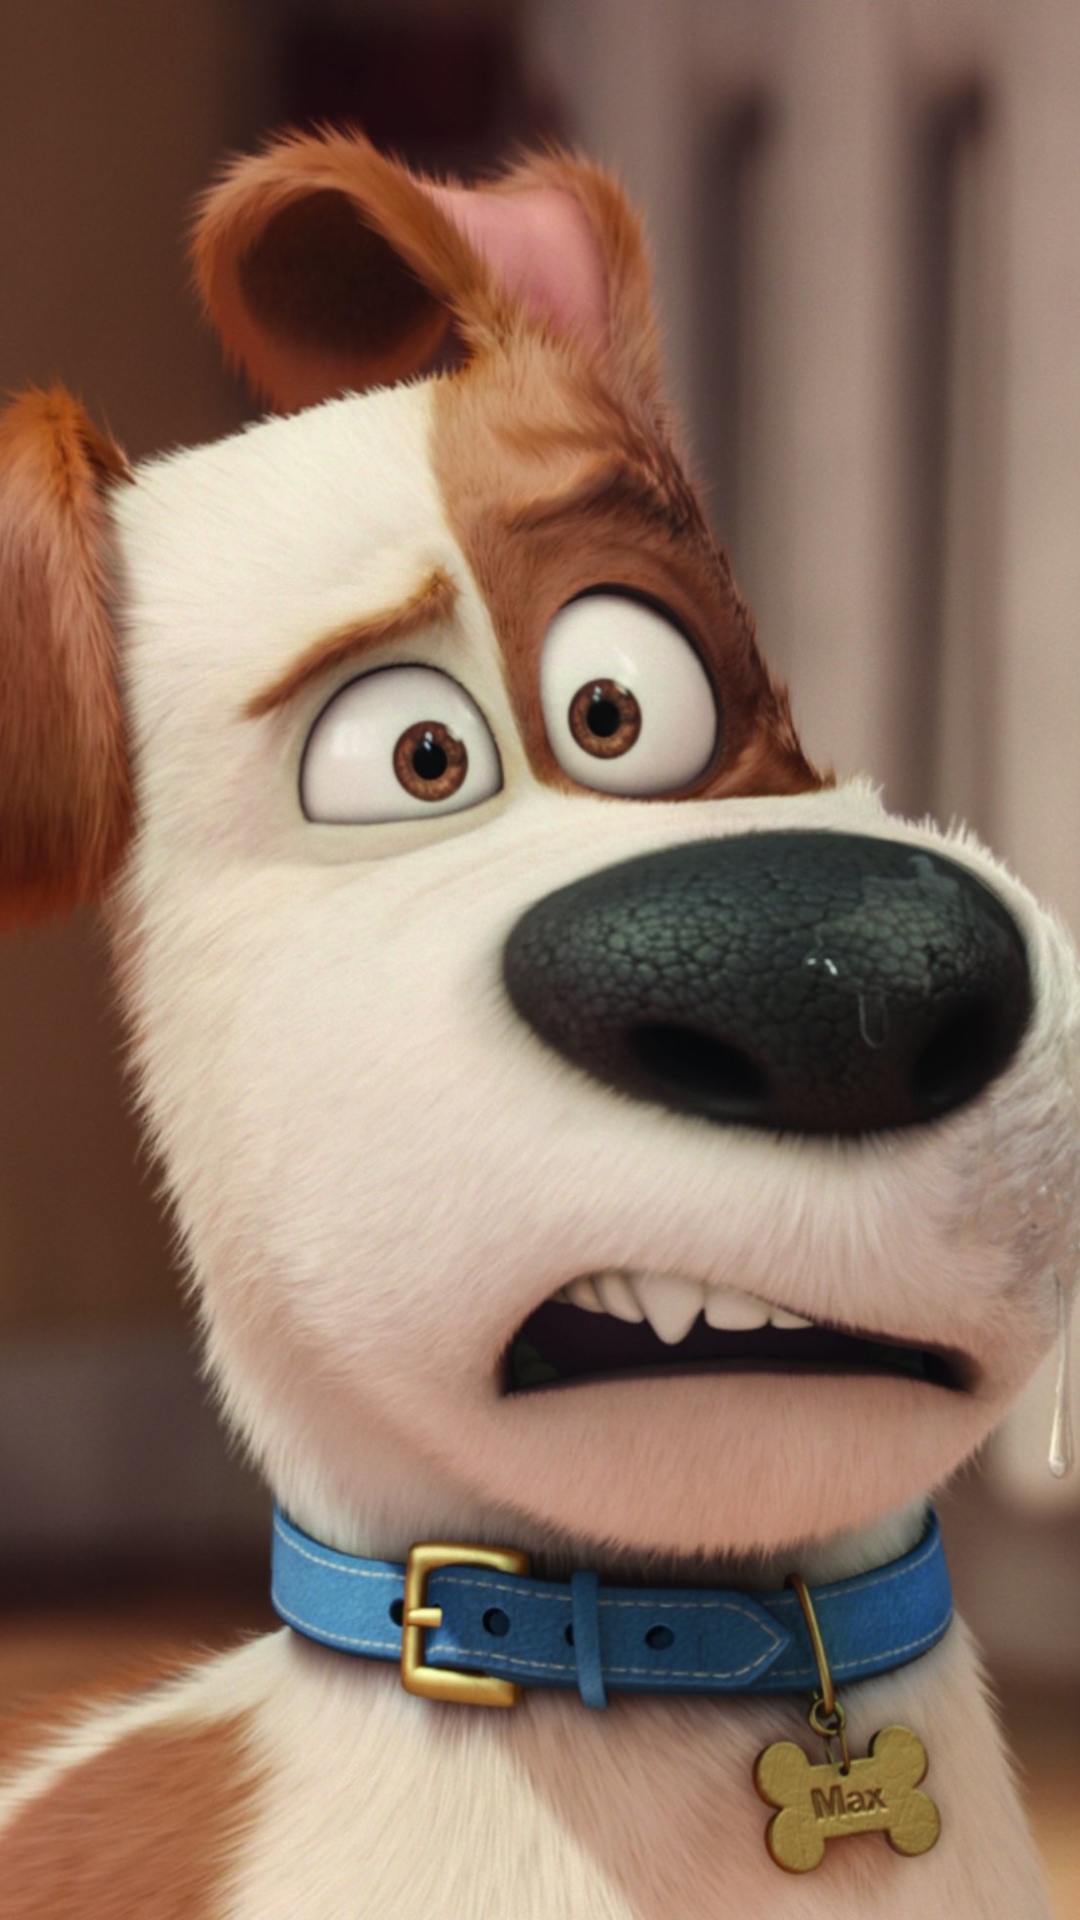 movie, the secret life of pets iphone wallpaper